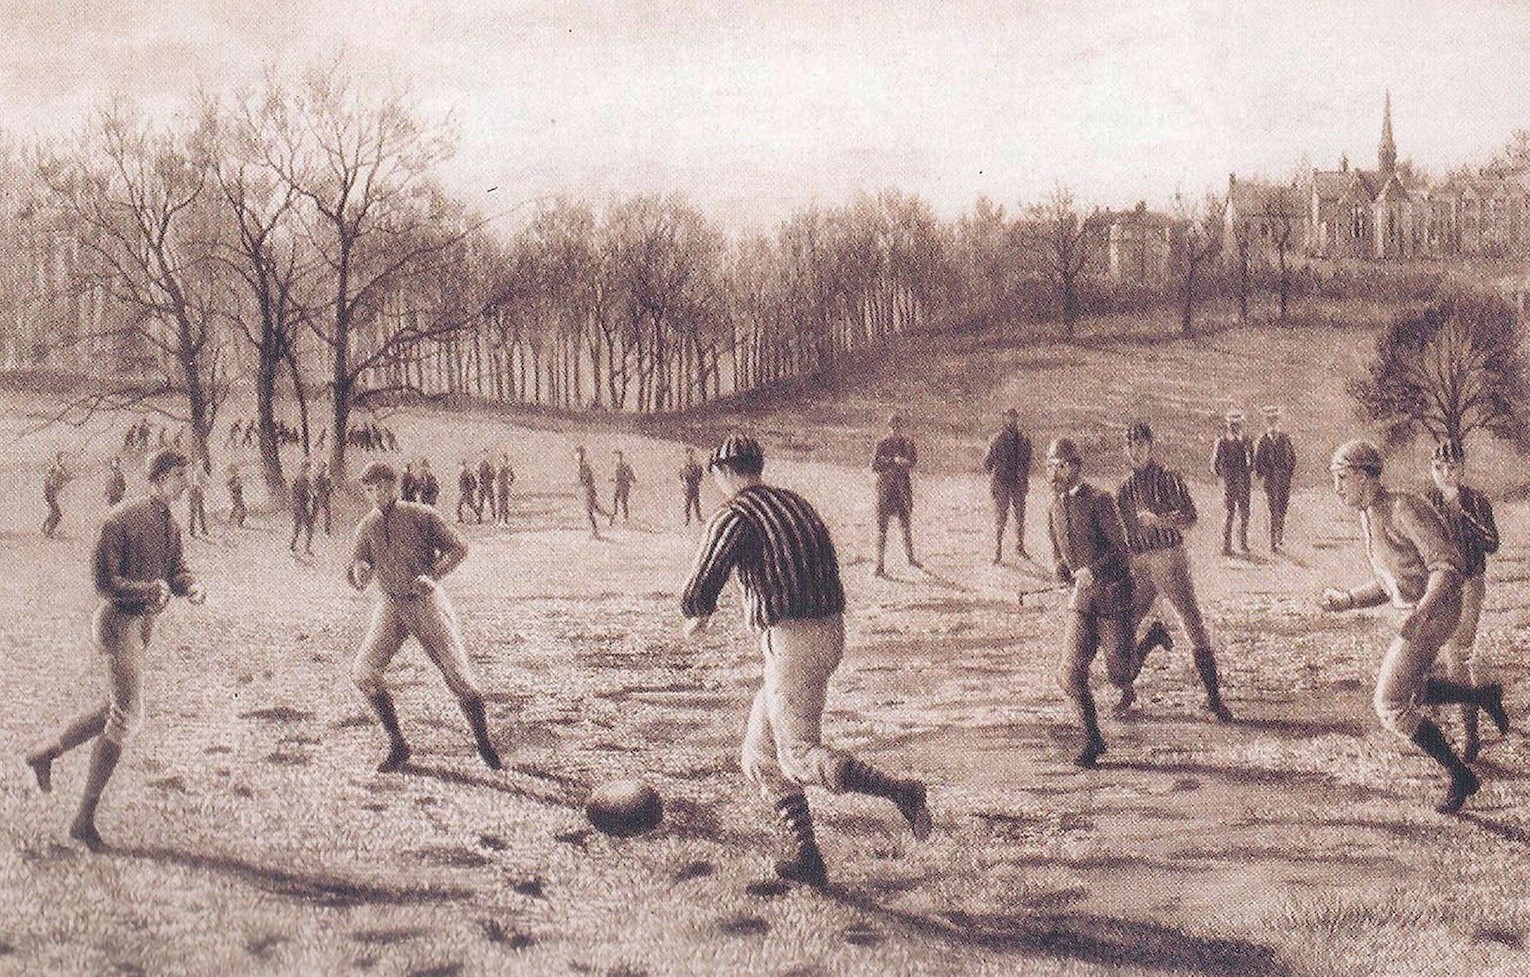 A drawing of people playing football in 19th century England by an anonymous artists.